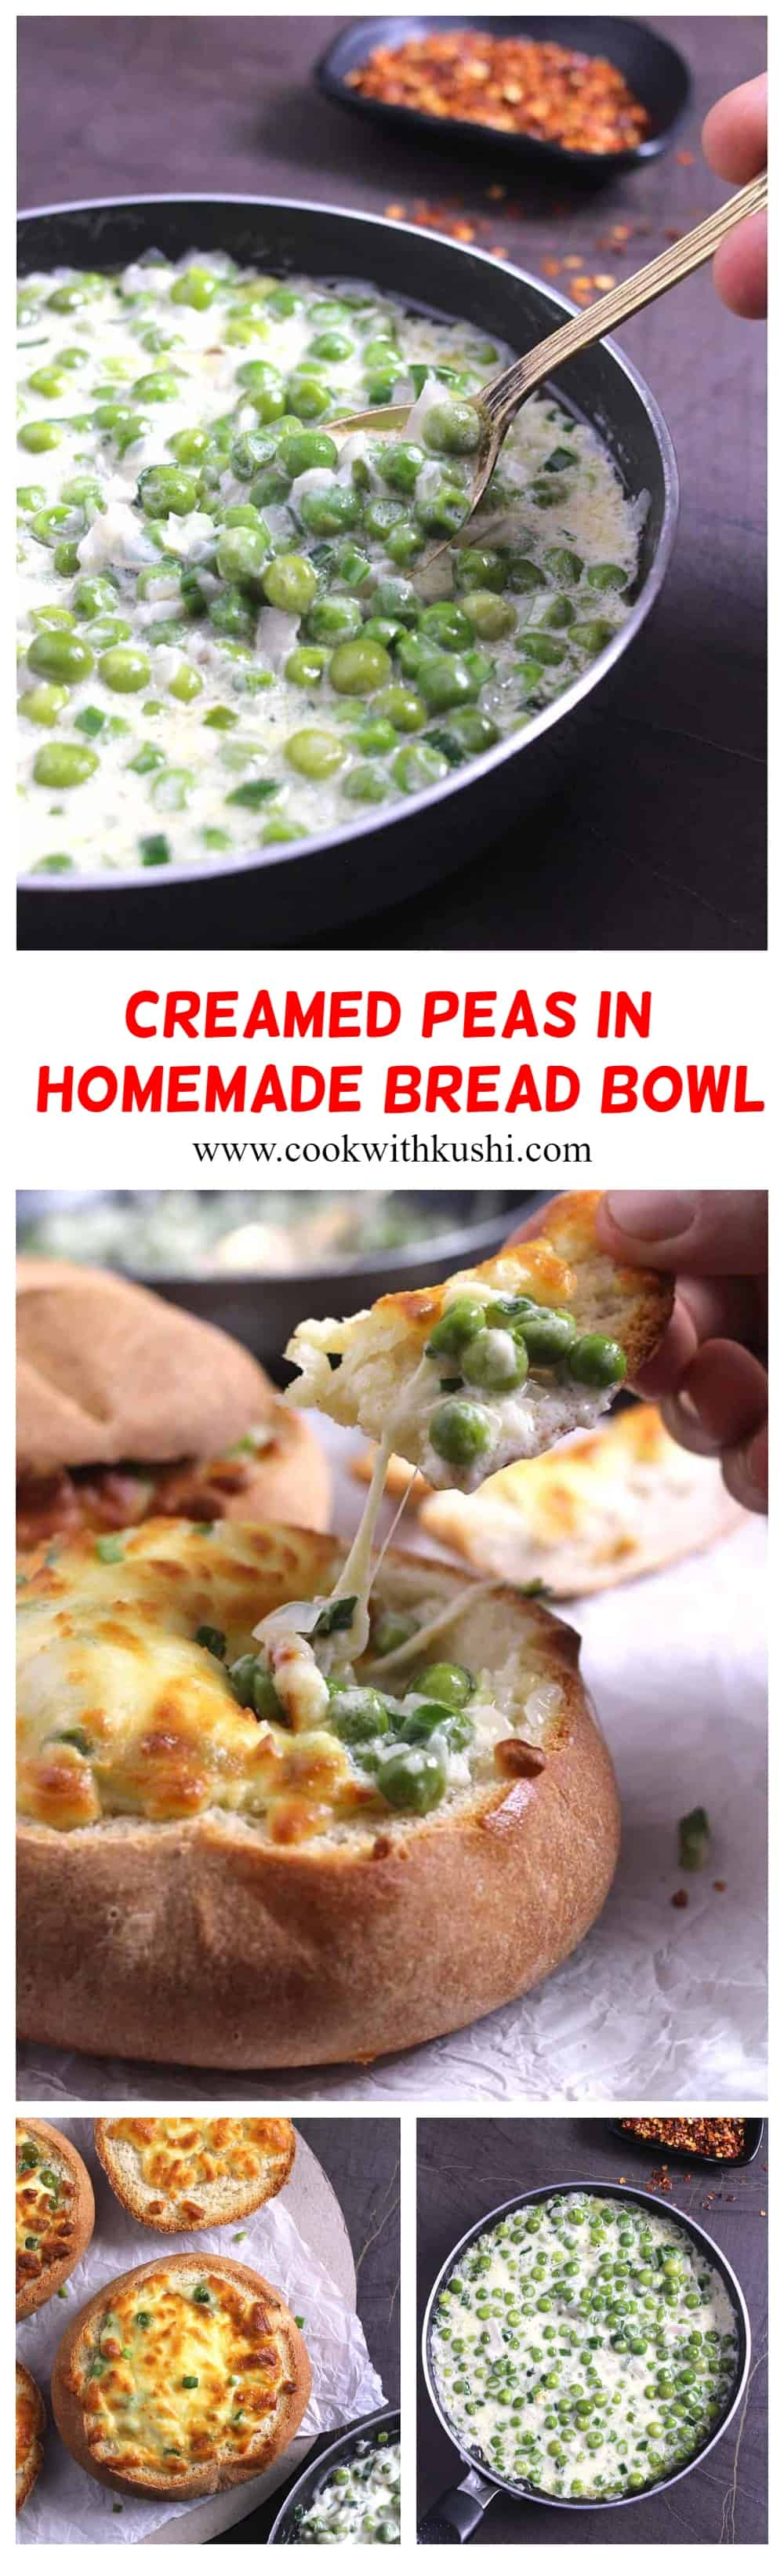  Creamed Peas in Bread Bowl is a rich and creamy, easy and delicious recipe for any meal. Green peas are simmered in the buttery cream sauce using simple ingredients. #holidaydinner #dinnerrecipes